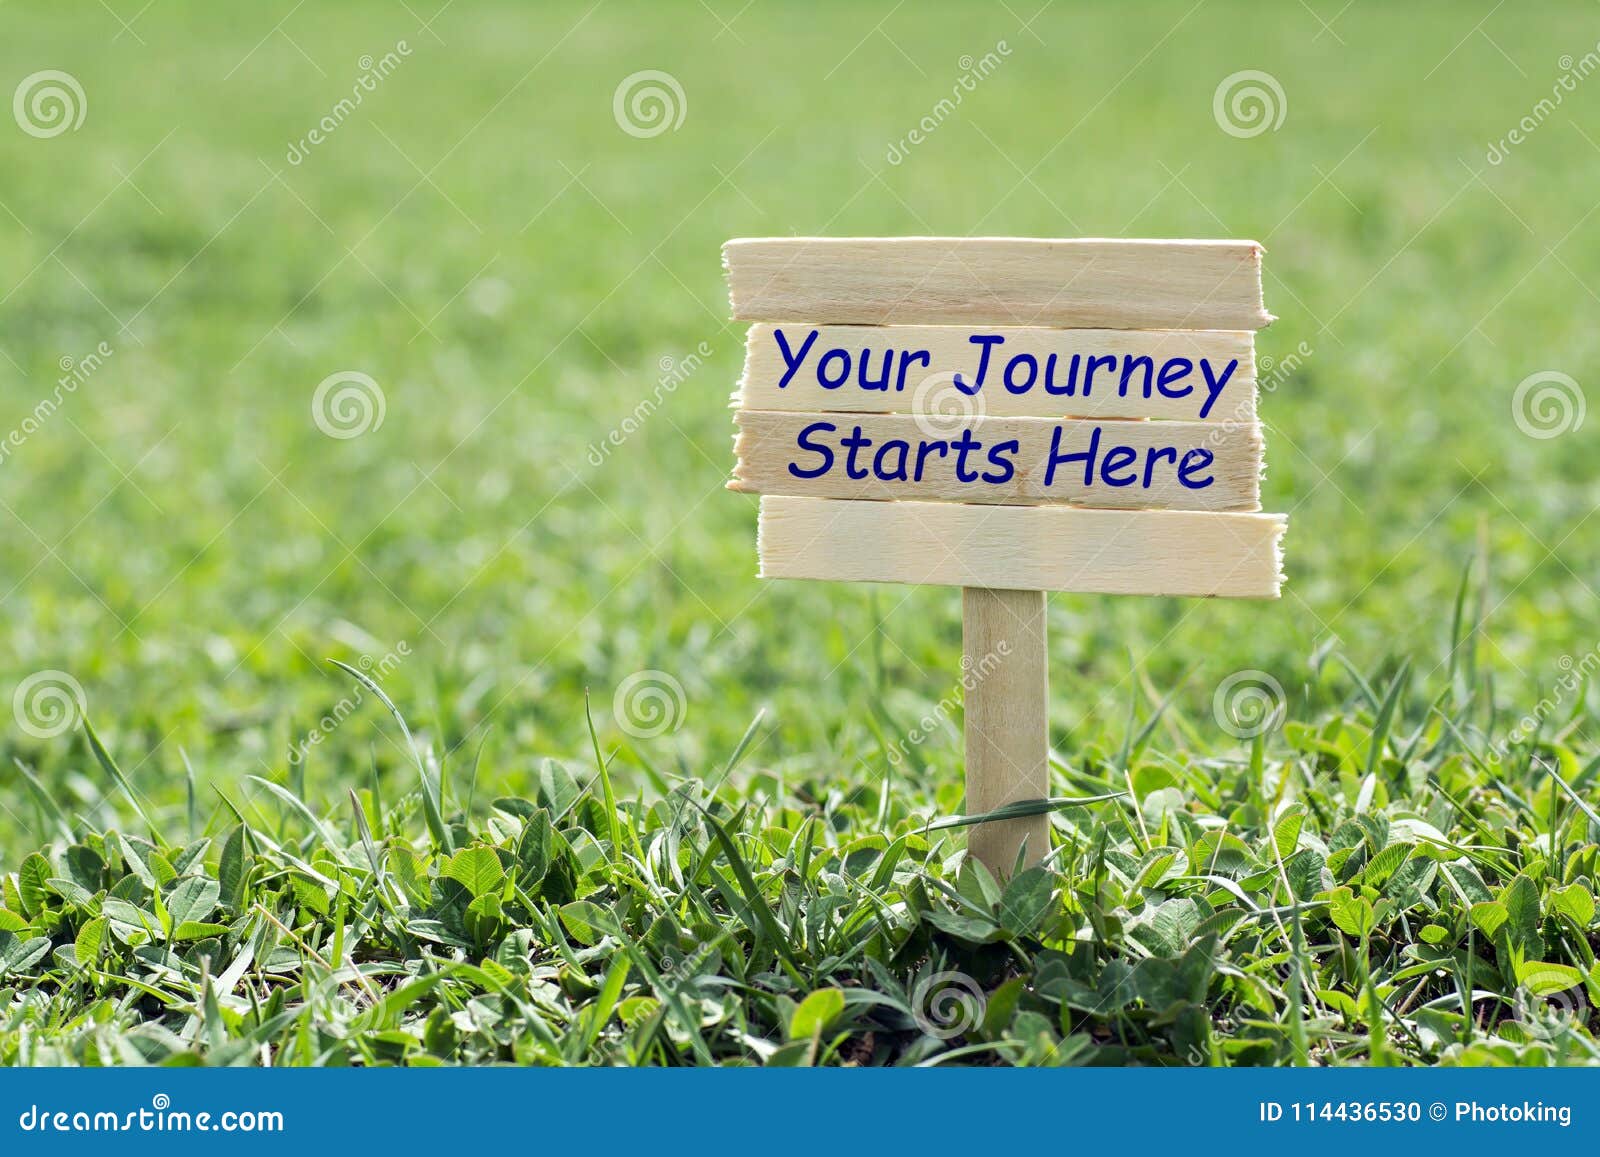 your journey starts here